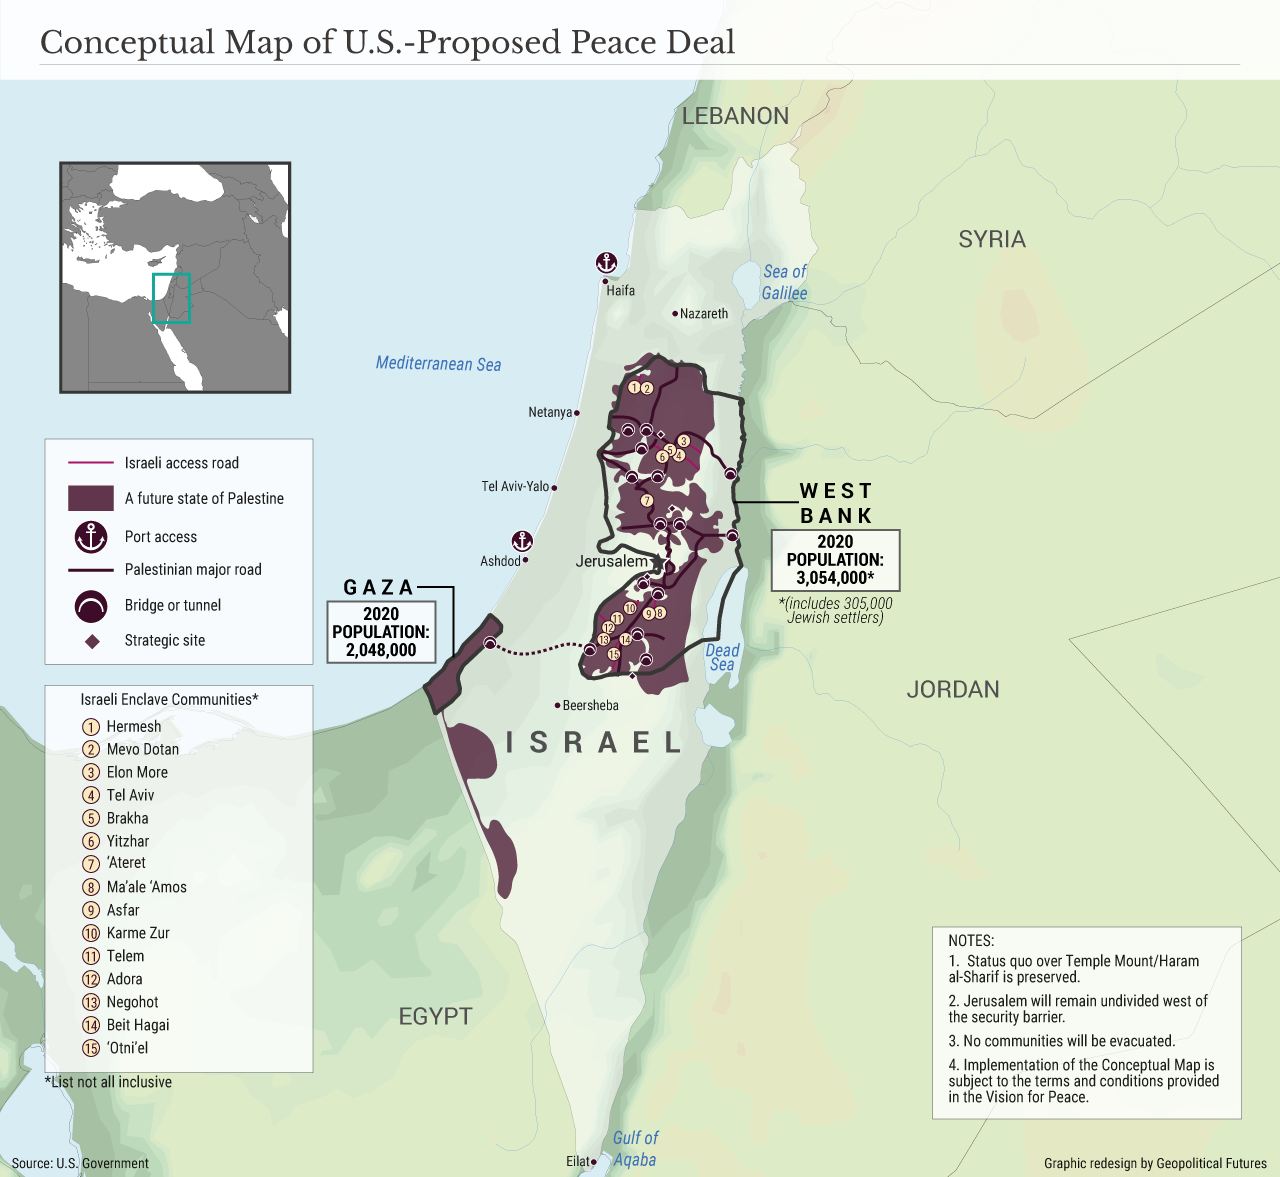 Conceptual map of U.S.-Proposed Peace Deal